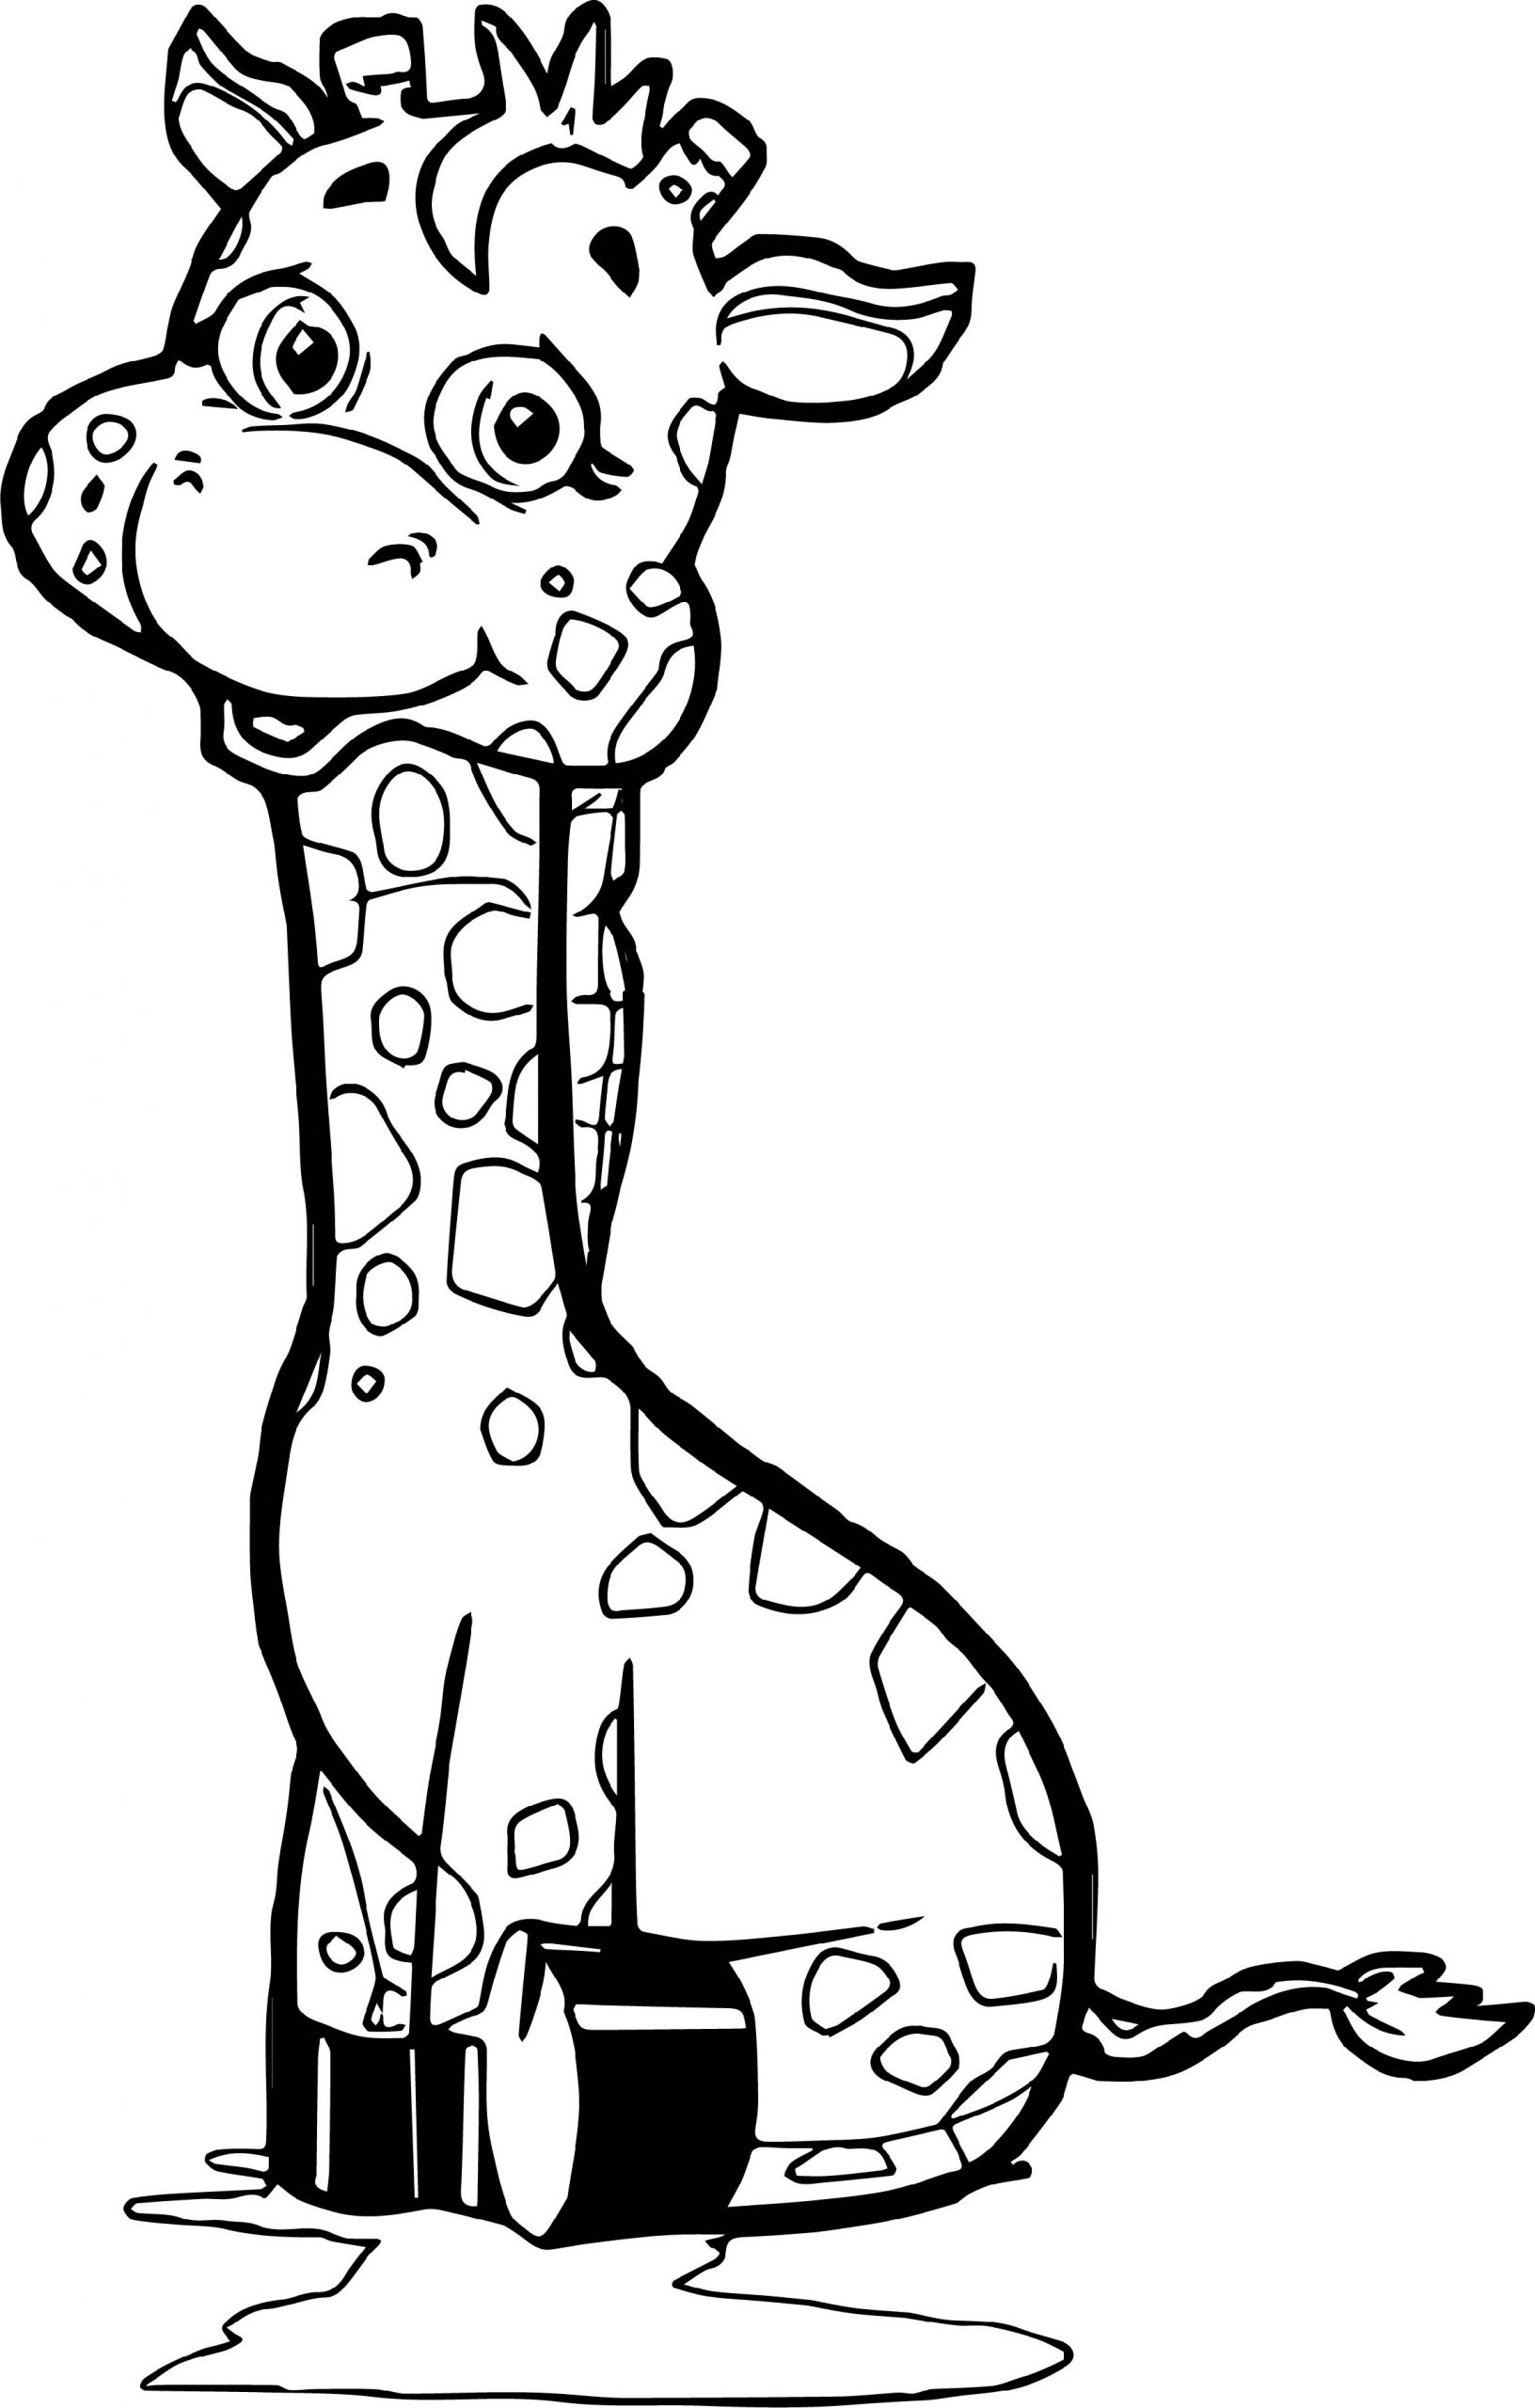 Giraffe Coloring Pages to Print | 101 Coloring